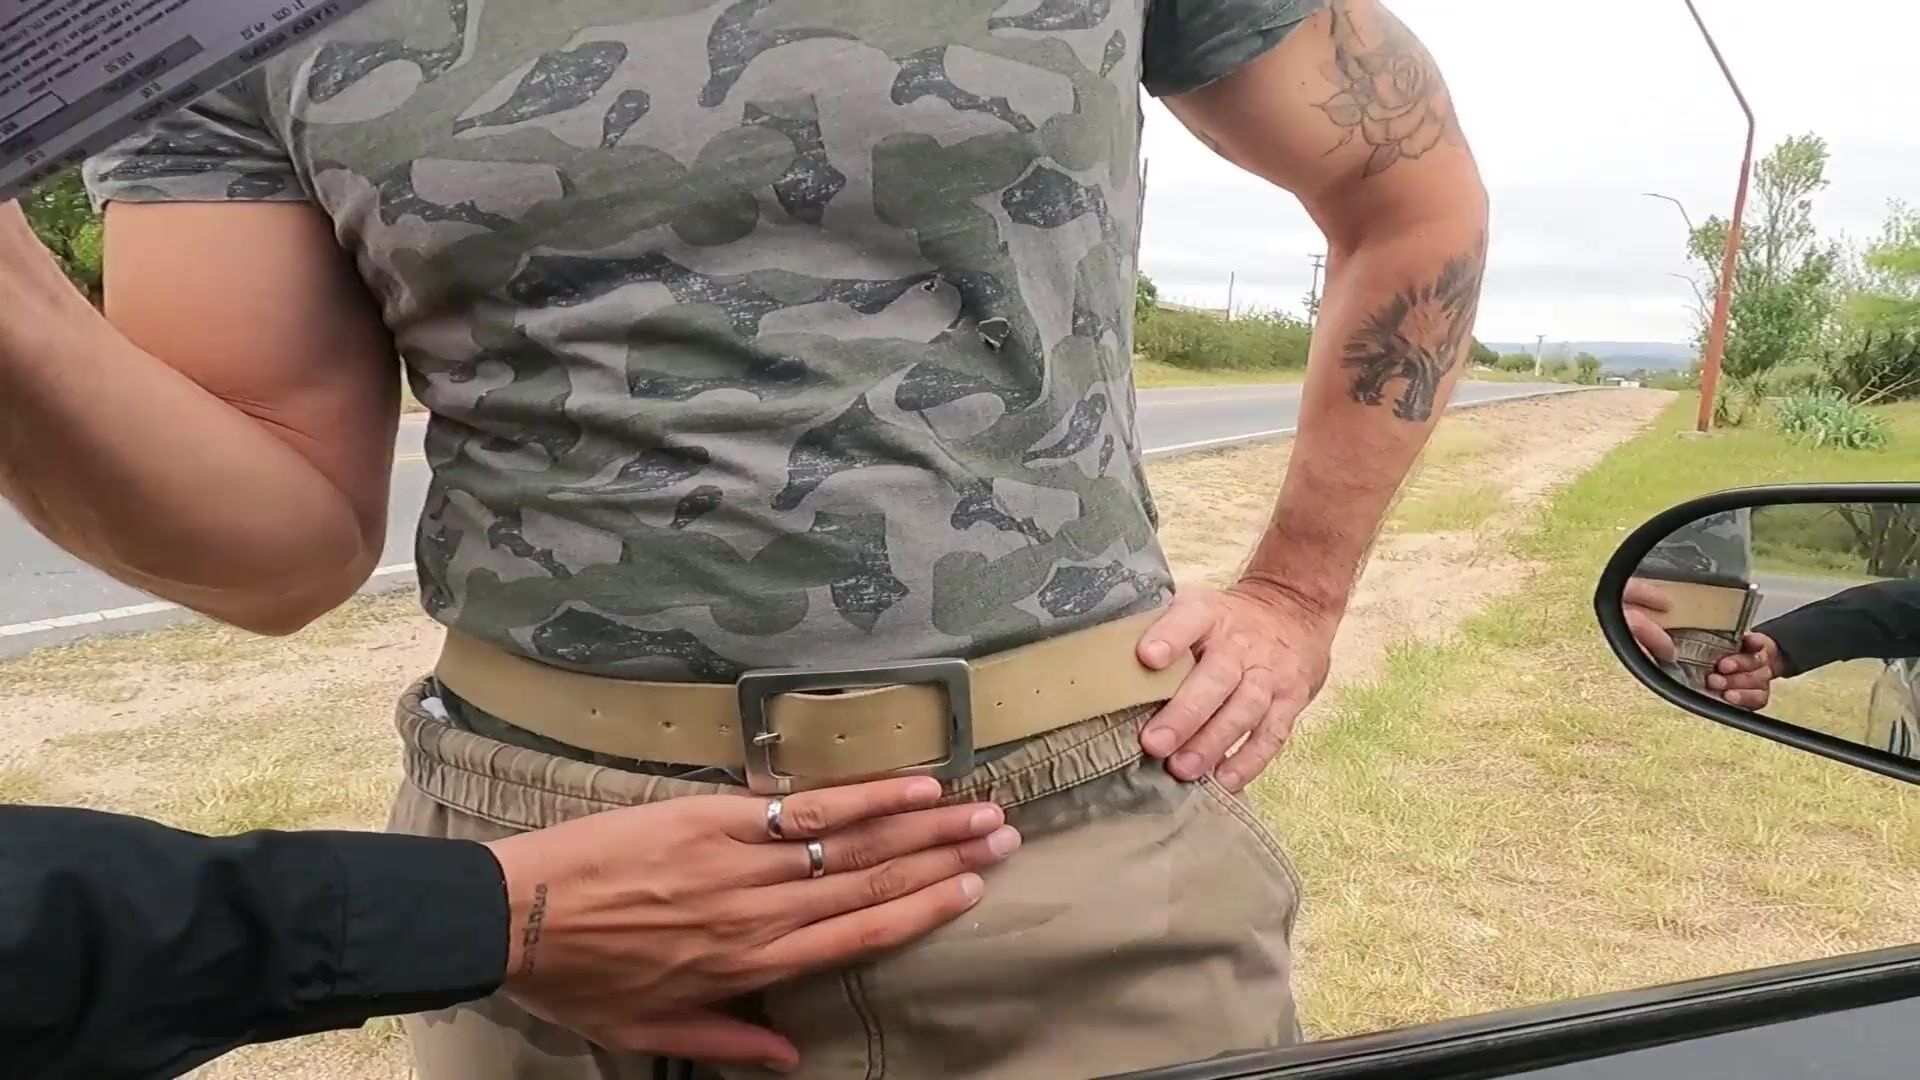 Bottom twinks bubble a-hole gives oral-sex bareback to military dude with a massive cock - homemade movie to pay a worthwhile - bottom bi-sexual outdoor sex giant cock